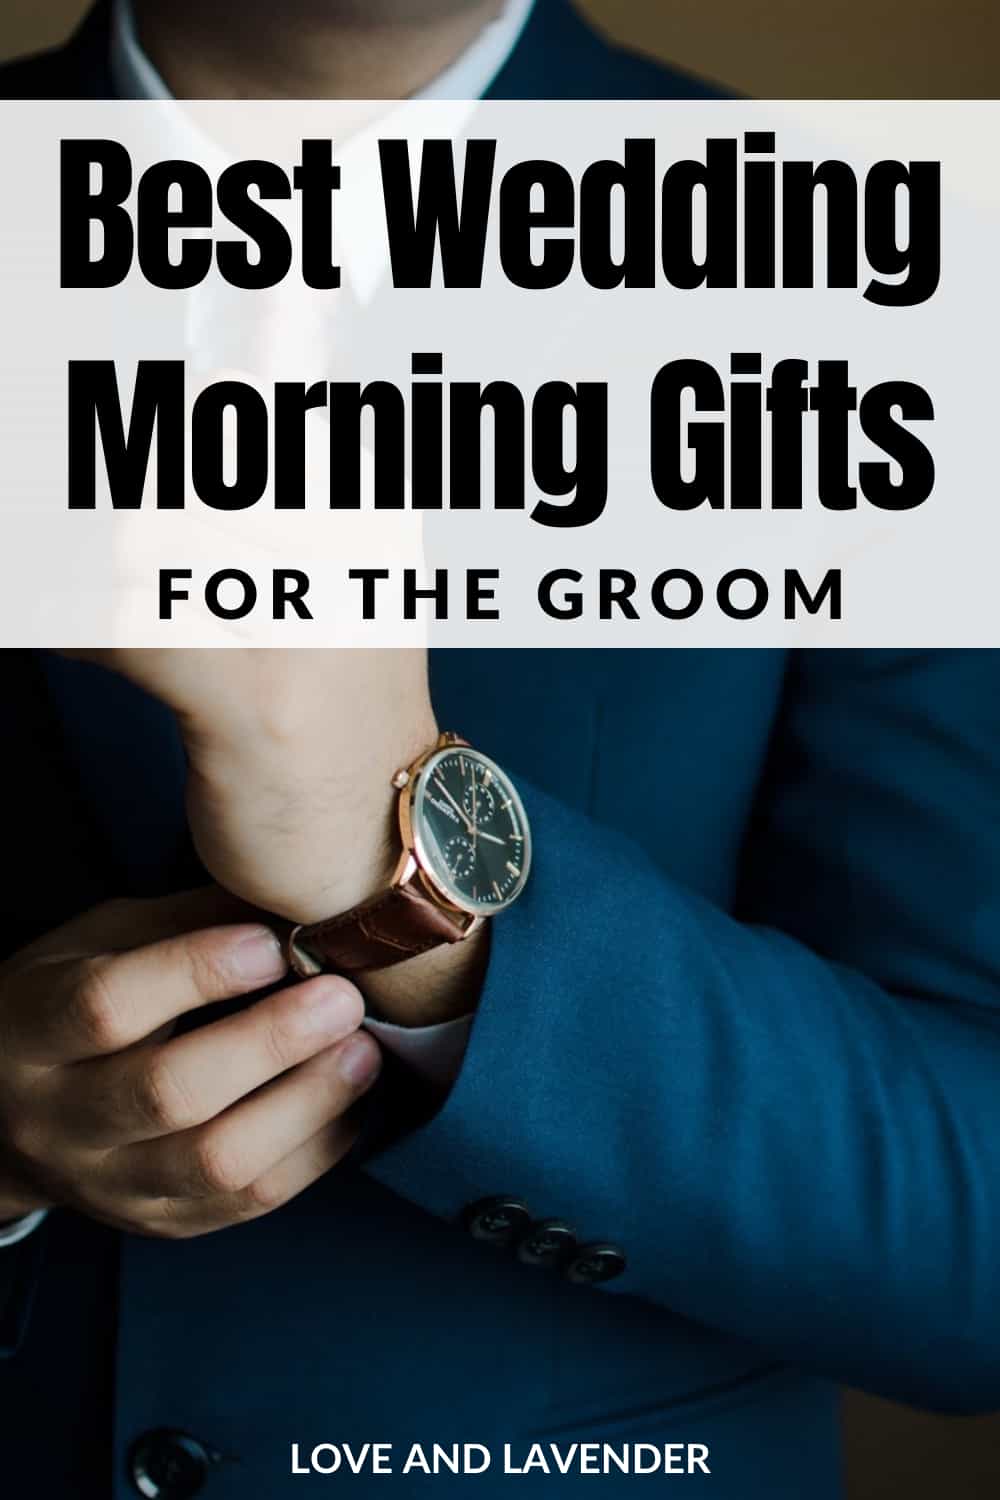 62 Best Wedding Morning Gifts for the Groom